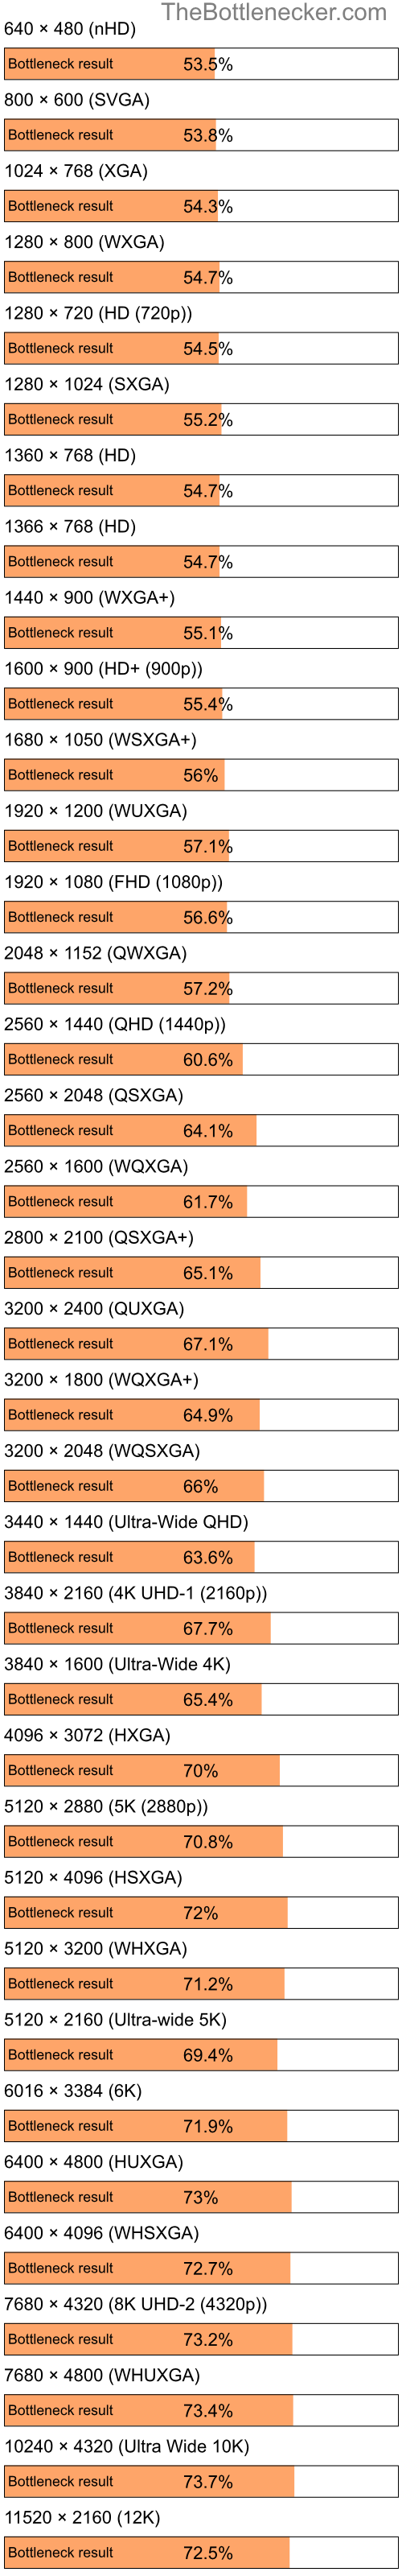 Bottleneck results by resolution for Intel Pentium 4 and AMD Mobility Radeon HD 2400 in Processor Intense Tasks